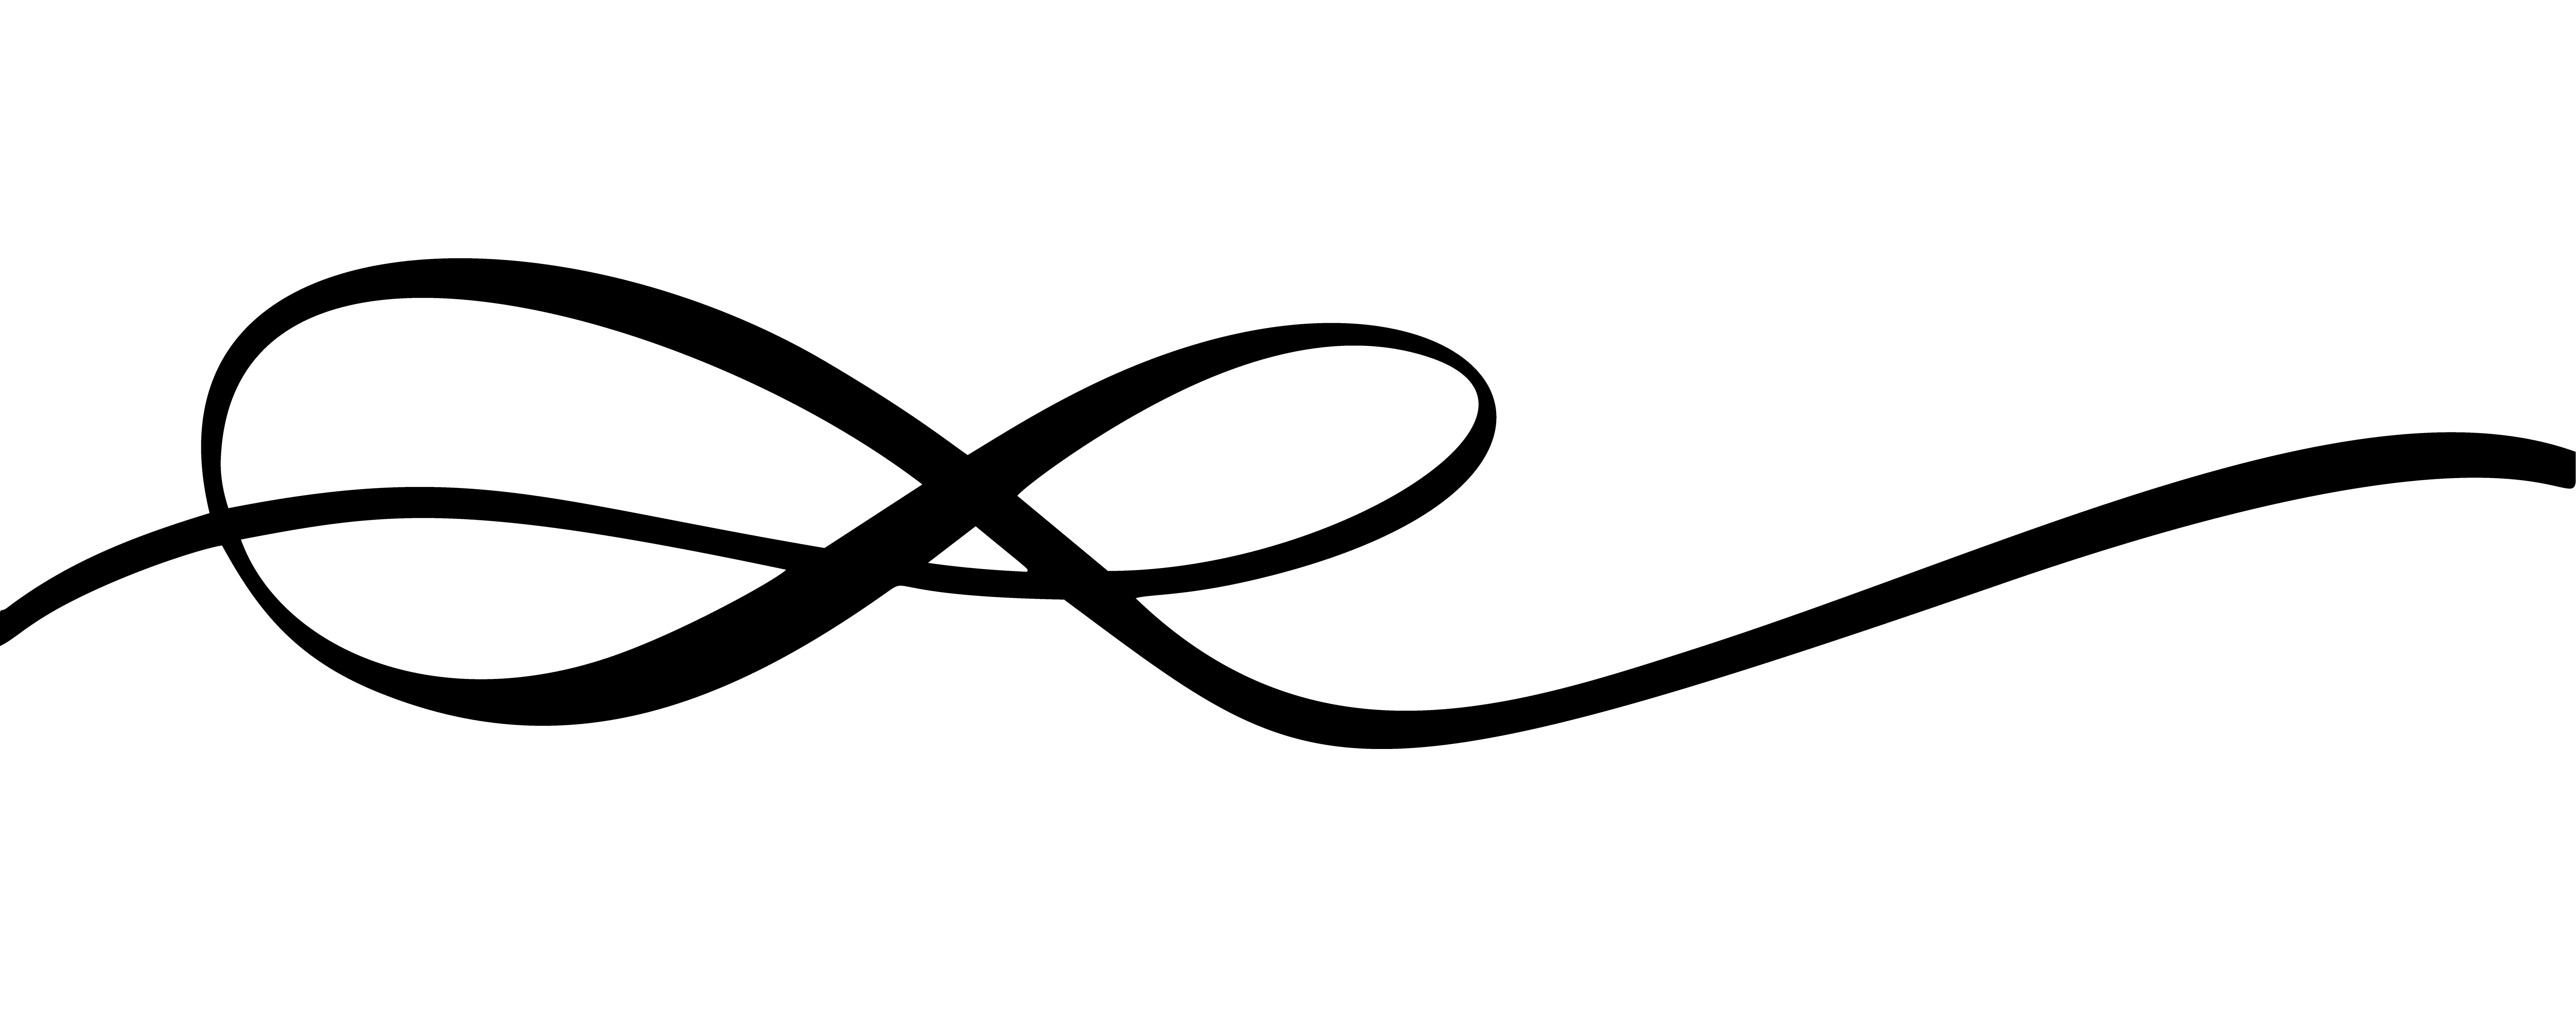 60 Infinity Tattoo Designs and Ideas with Meaning updated on June 29 2023